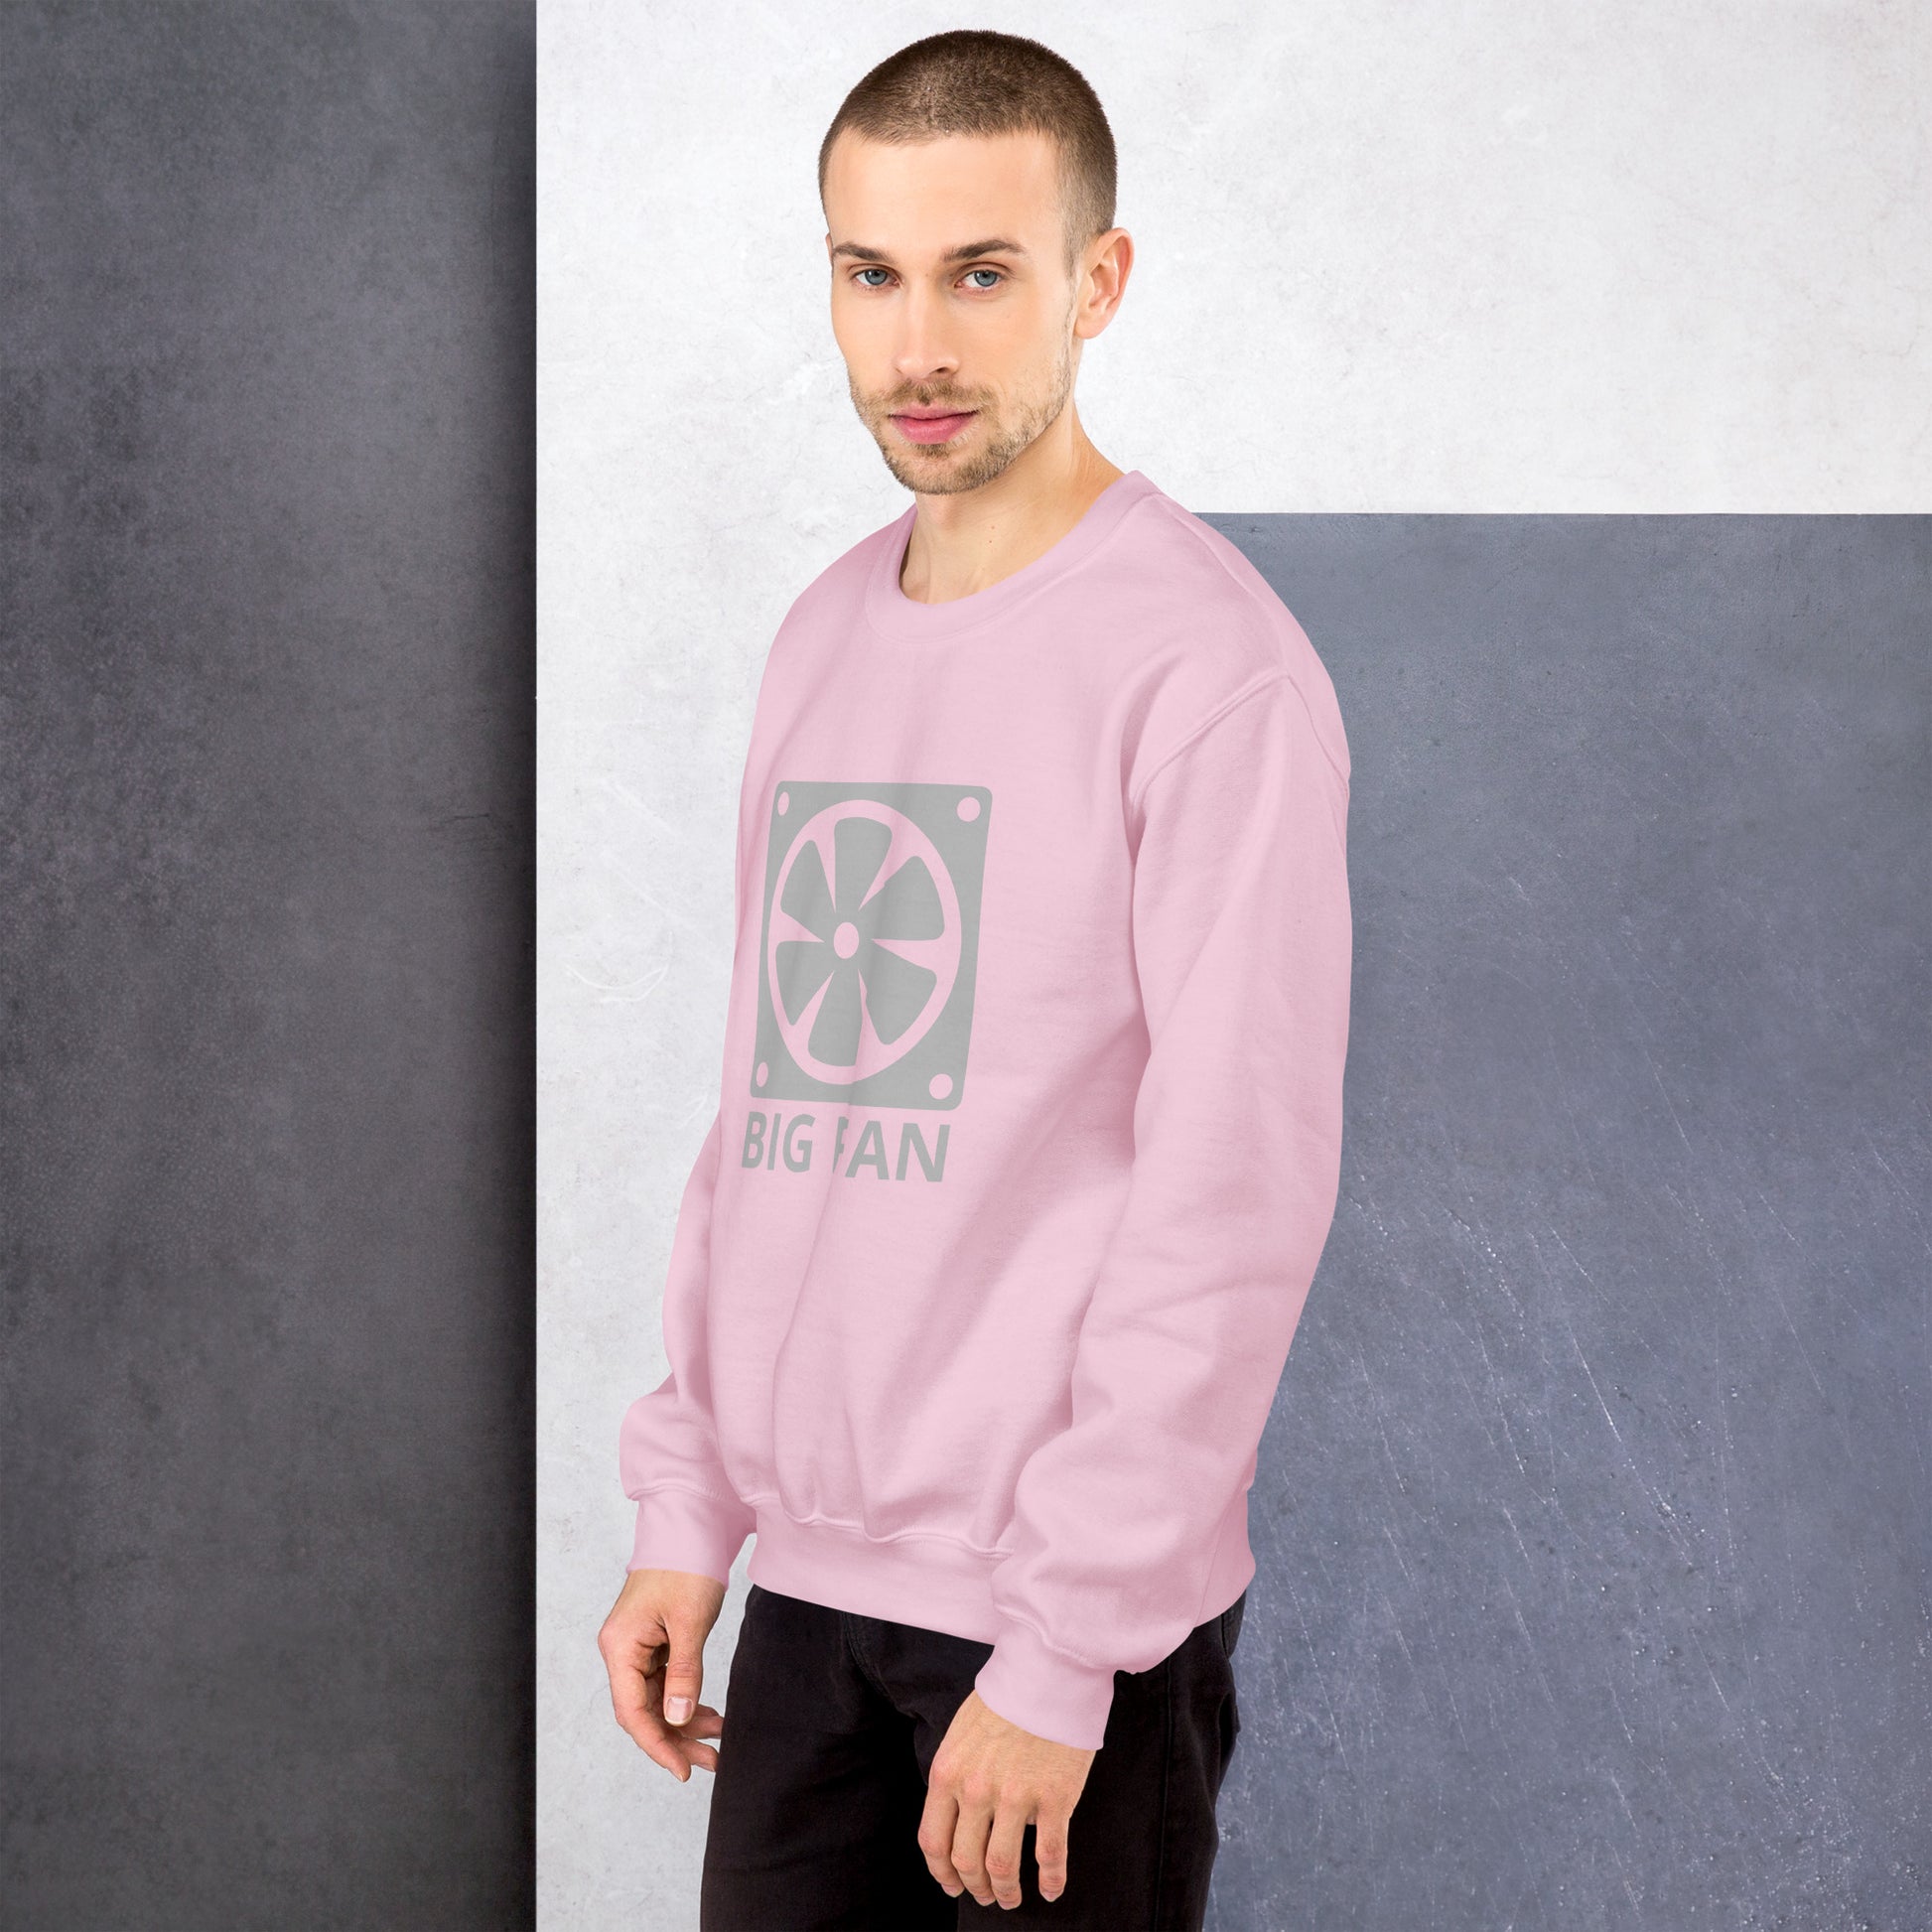 Men with pink sweatshirt with image of a big computer fan and the text "BIG FAN"